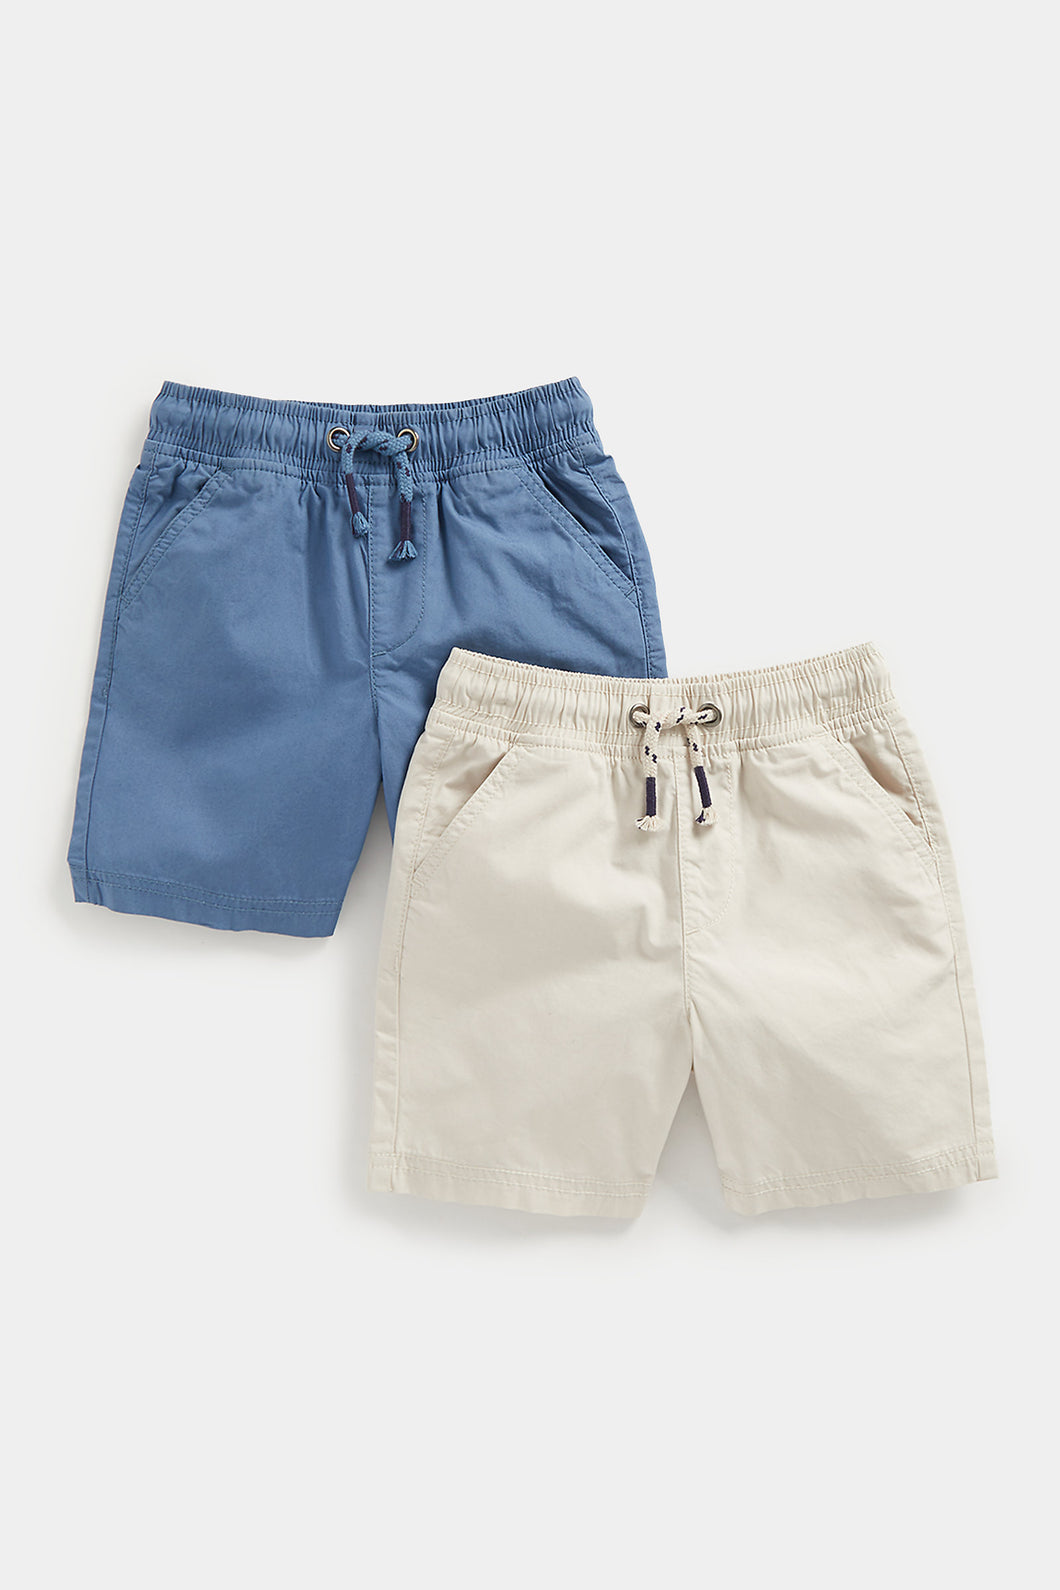 Mothercare Blue and Ecru Poplin Shorts - 2 Pack